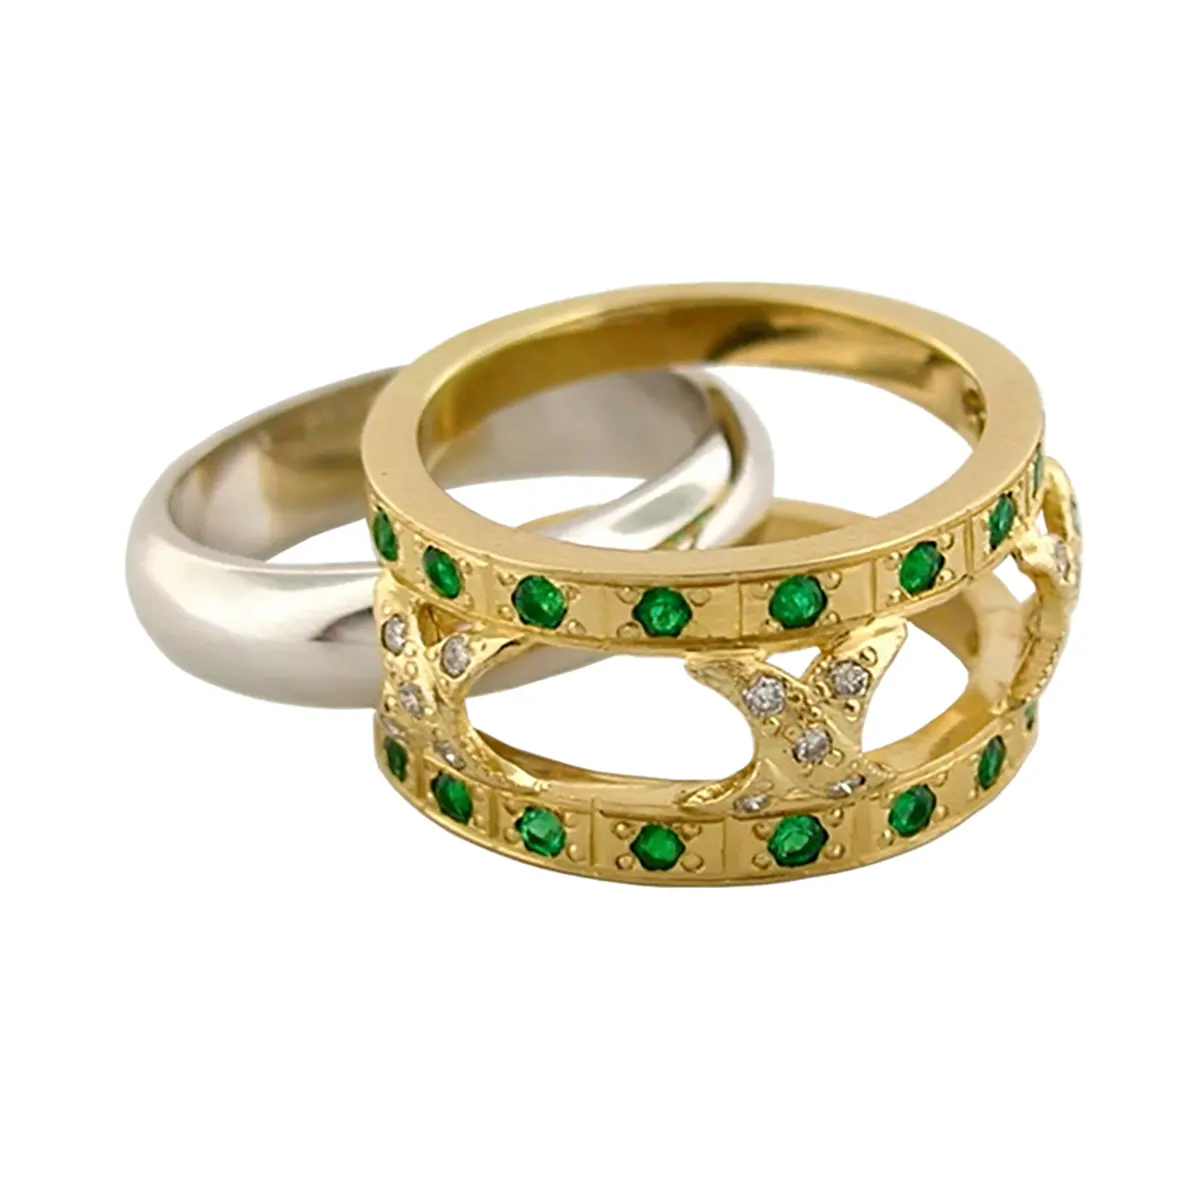 2-tones-emerald-and-diamond-band-ring-in-18k-gold